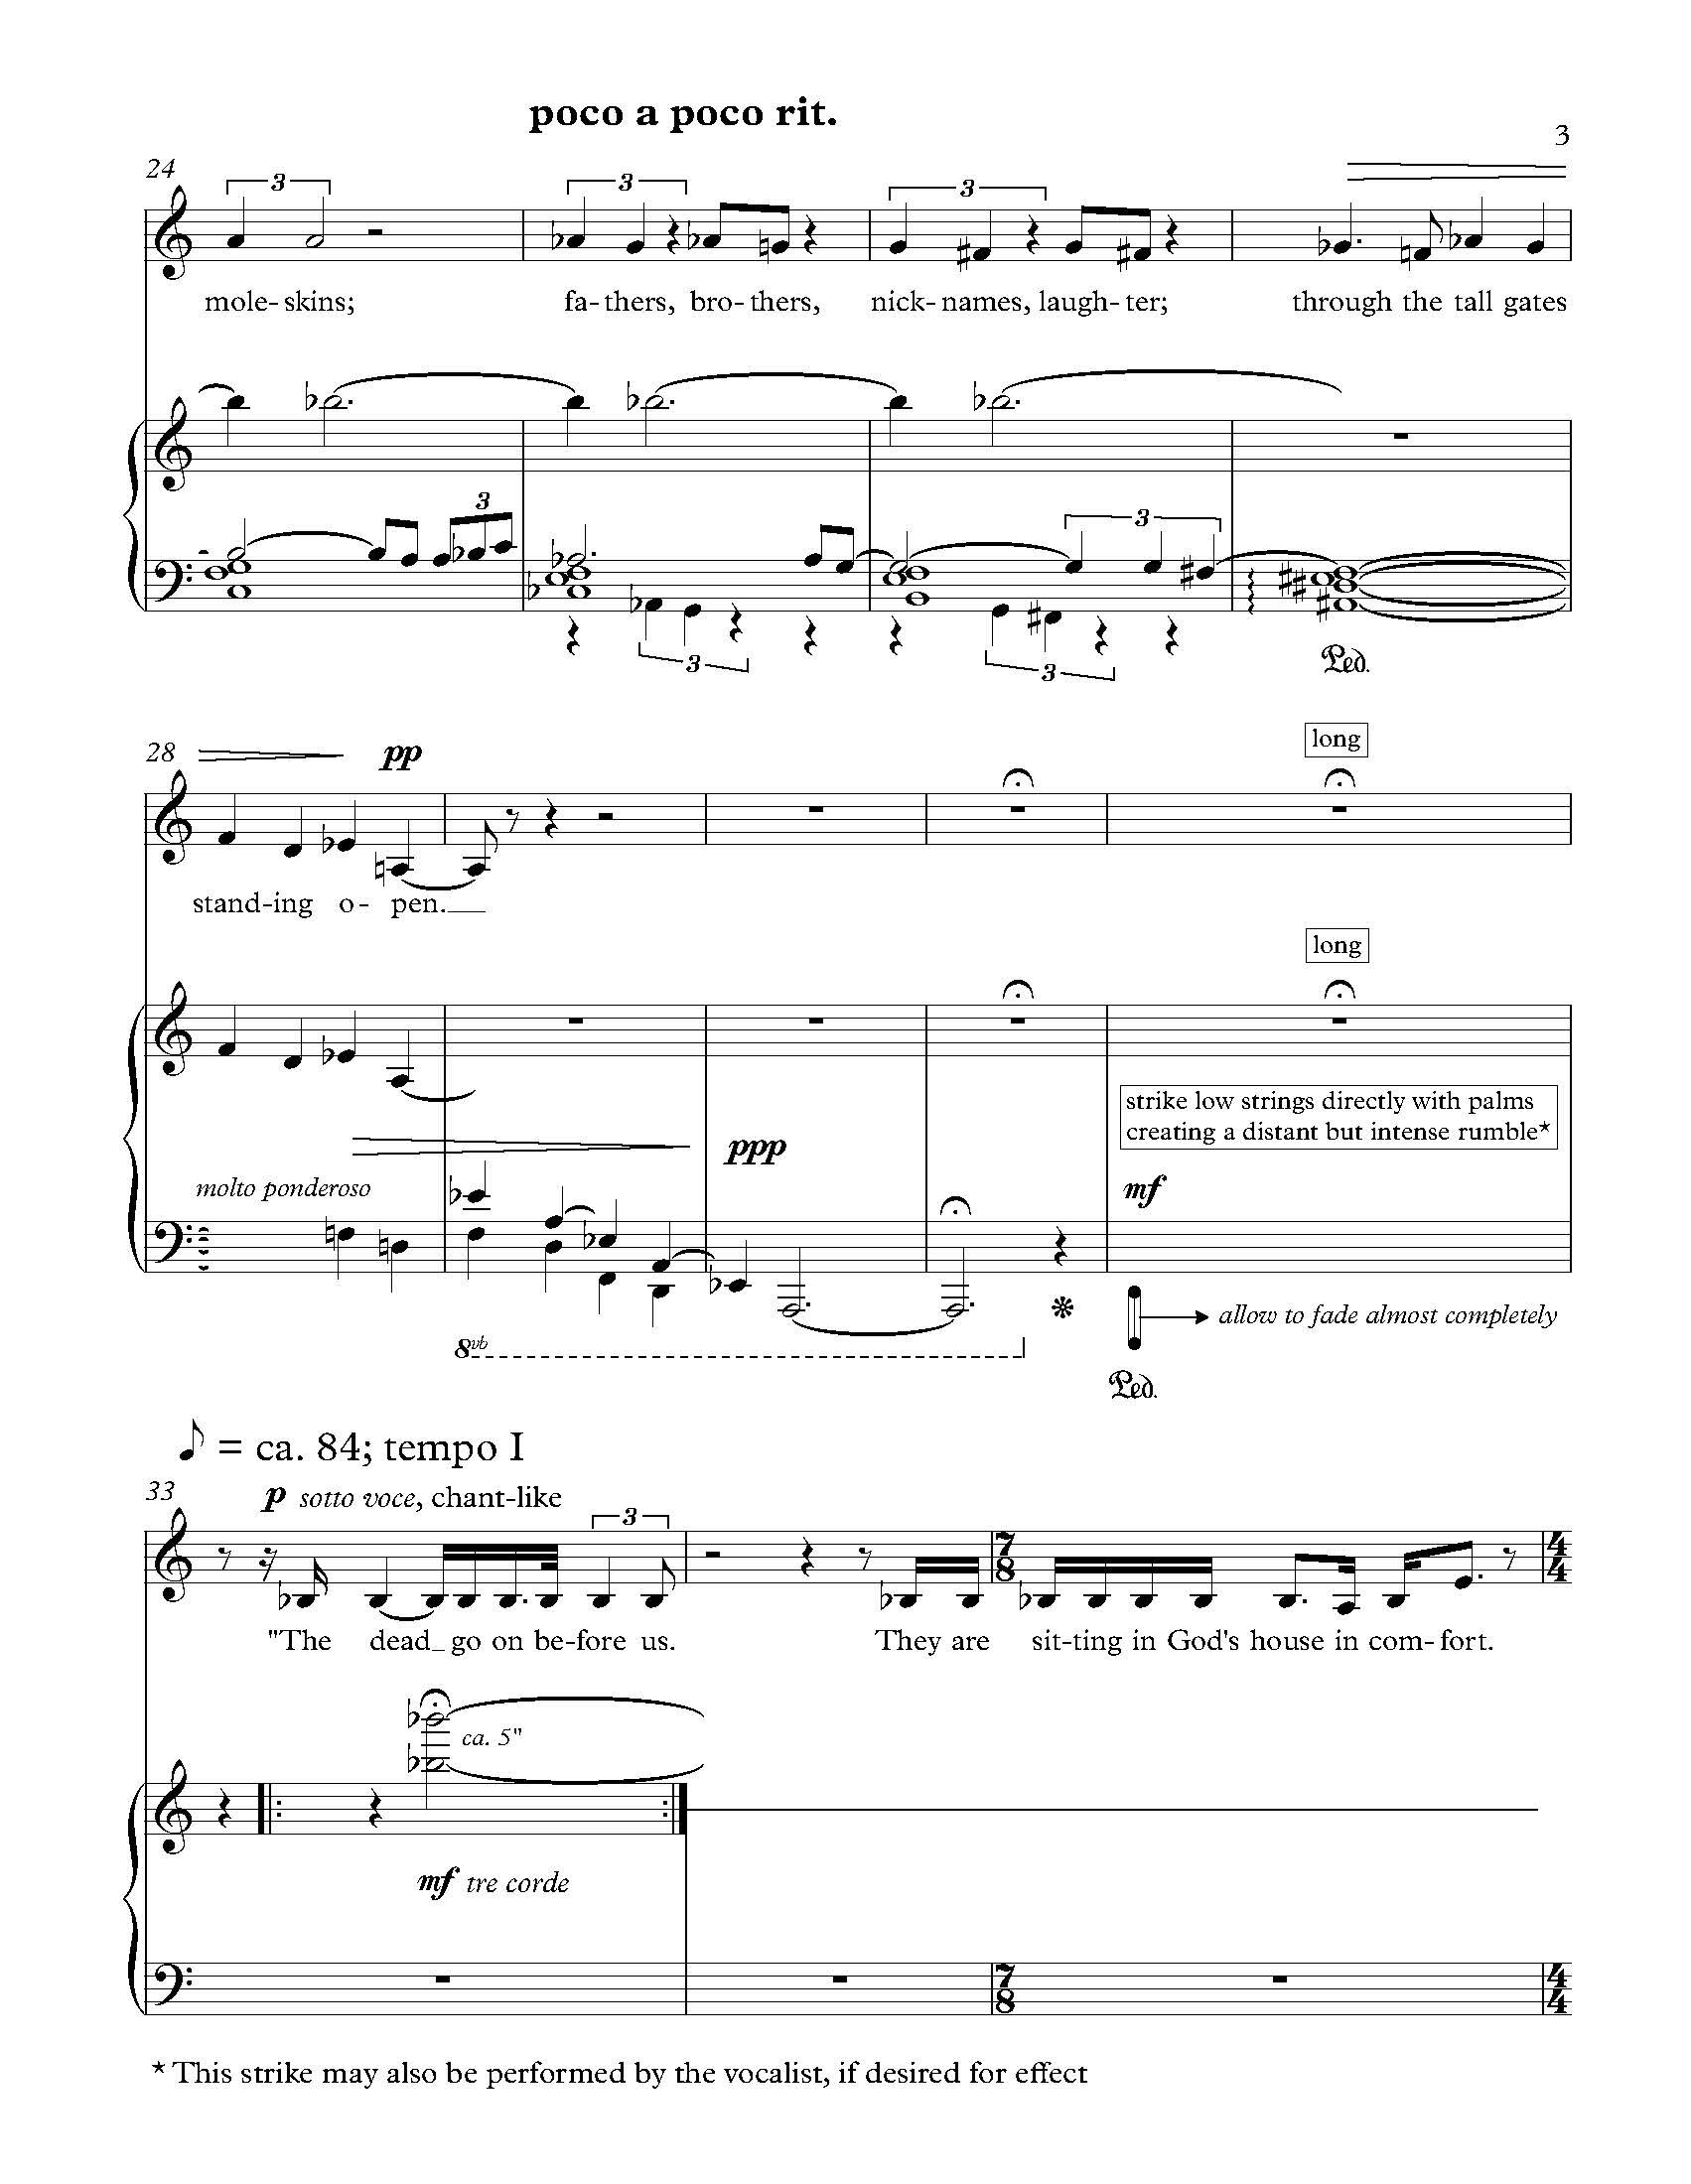 The Explosion - Complete Score_Page_09.jpg